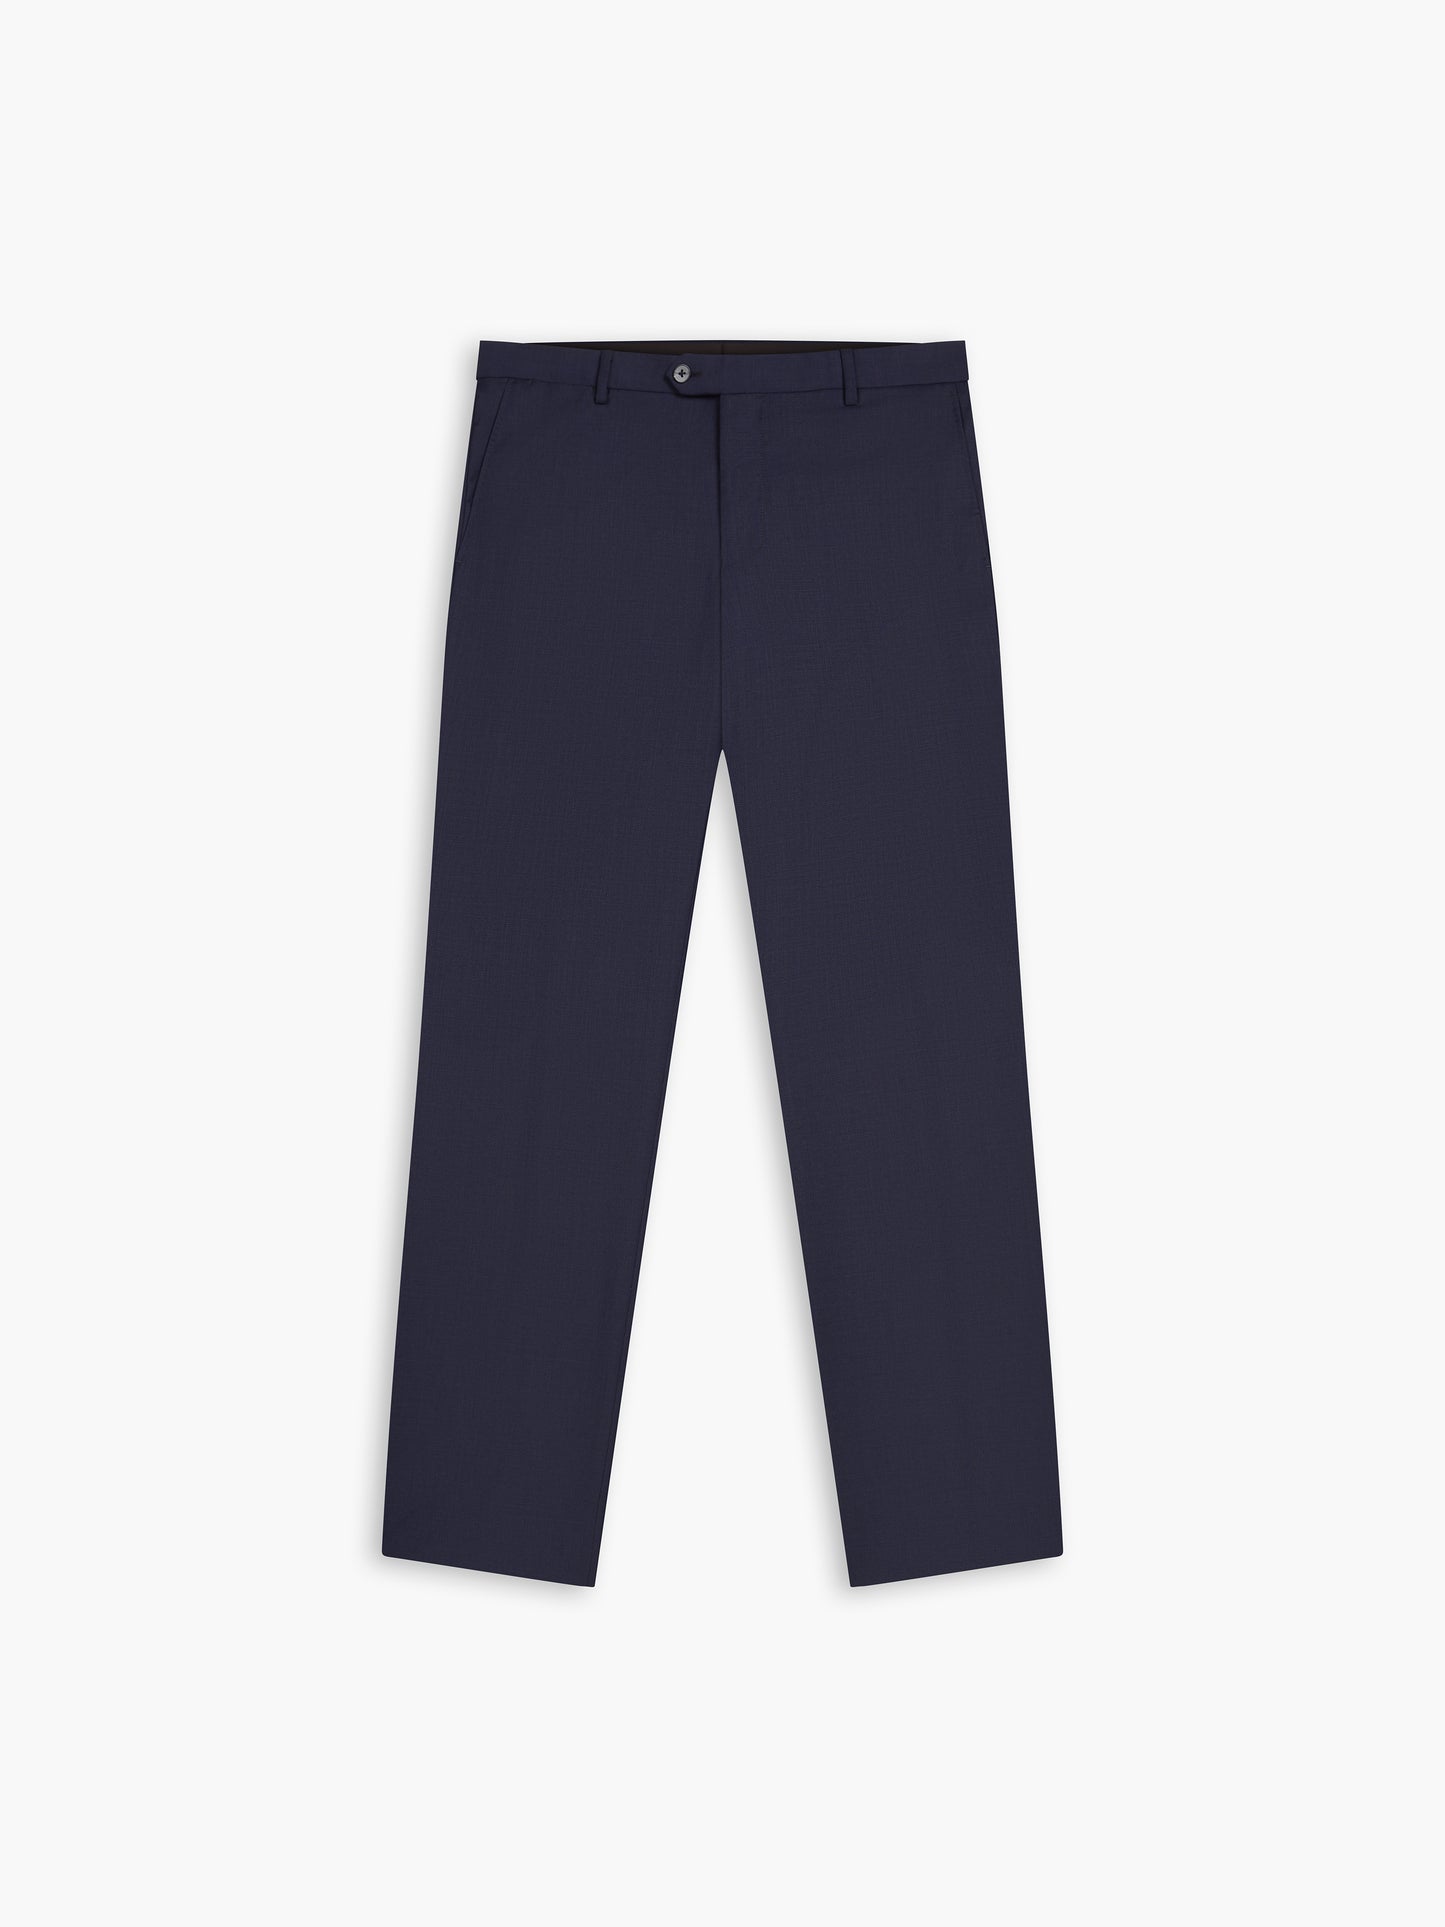 Costello Skinny Fit Navy Textured Trousers